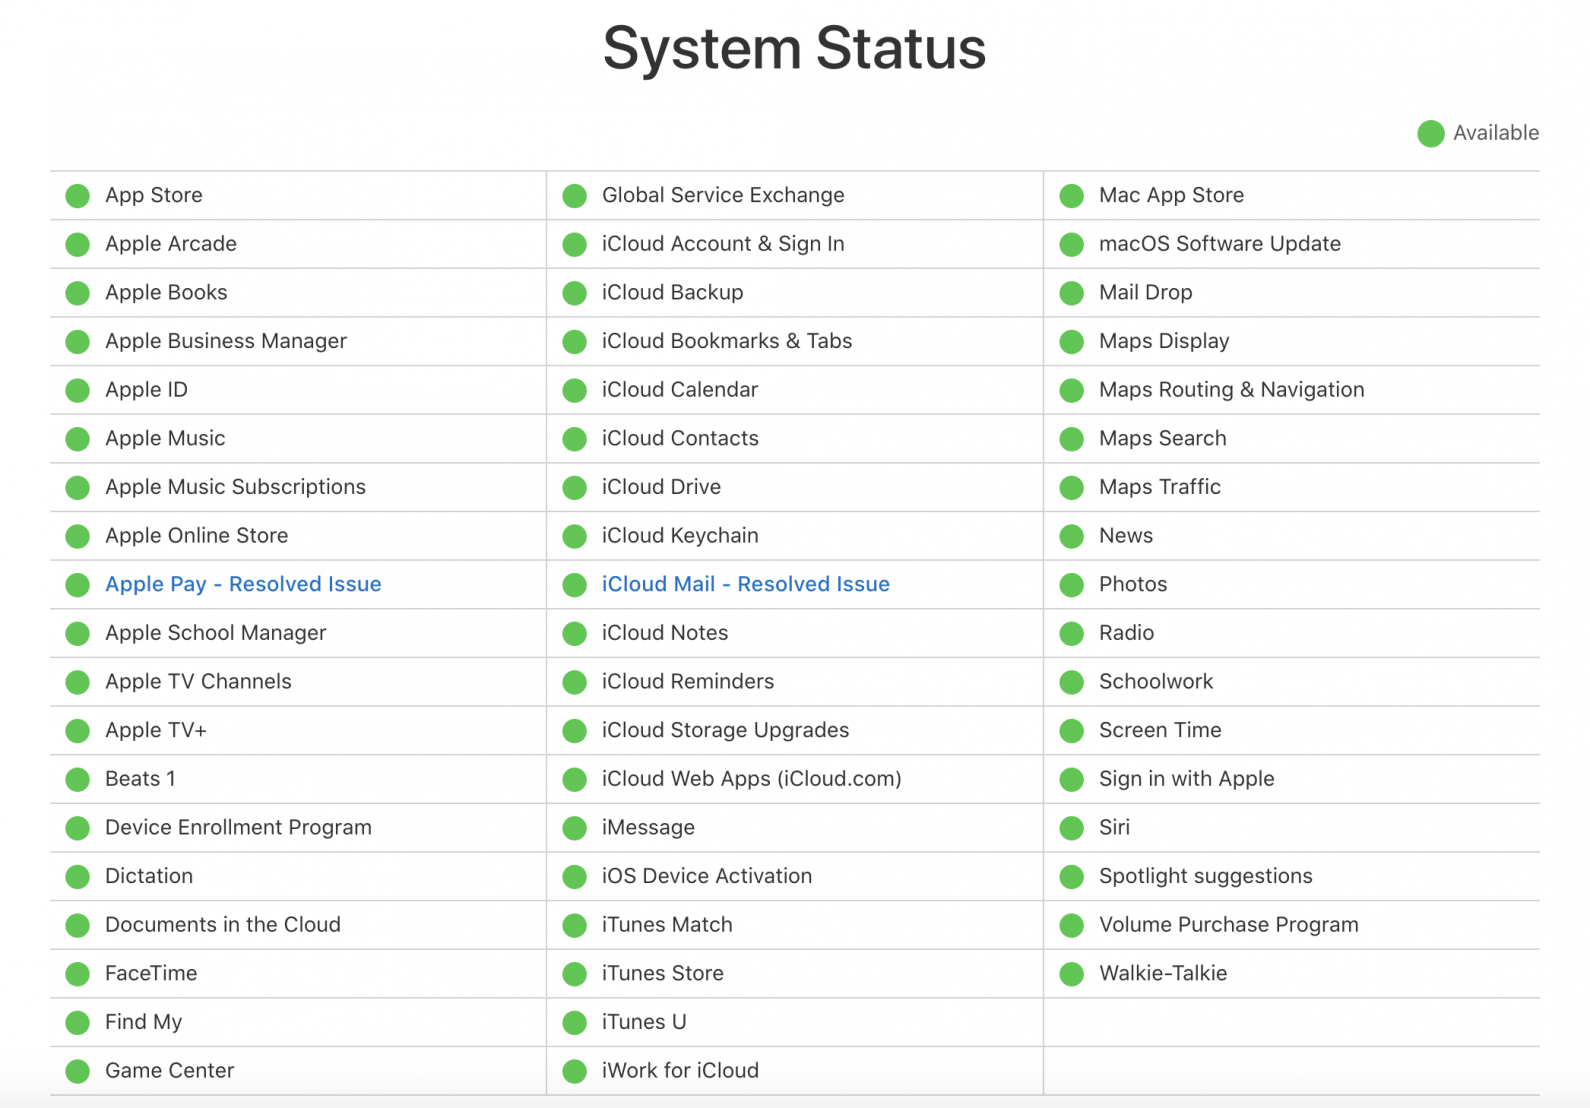 cant connect to any apple server